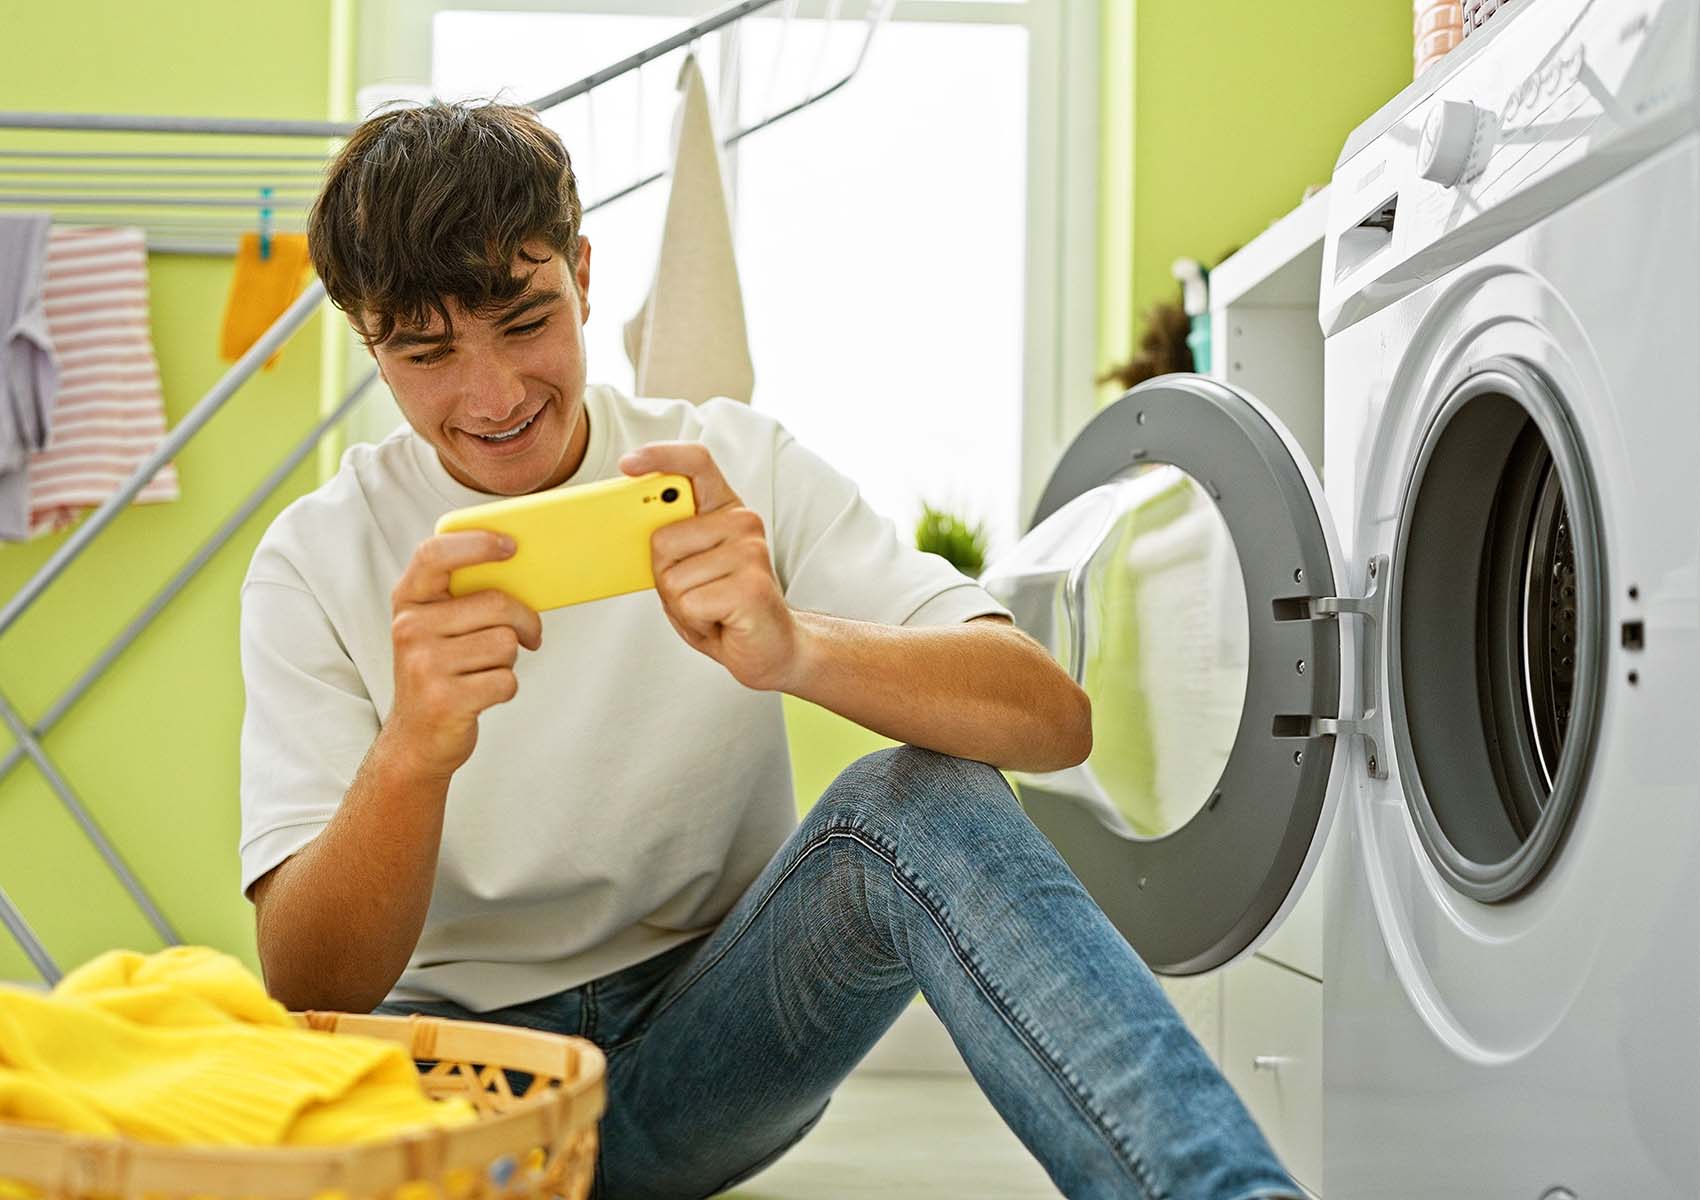 A teenager on their phone while doing laundry